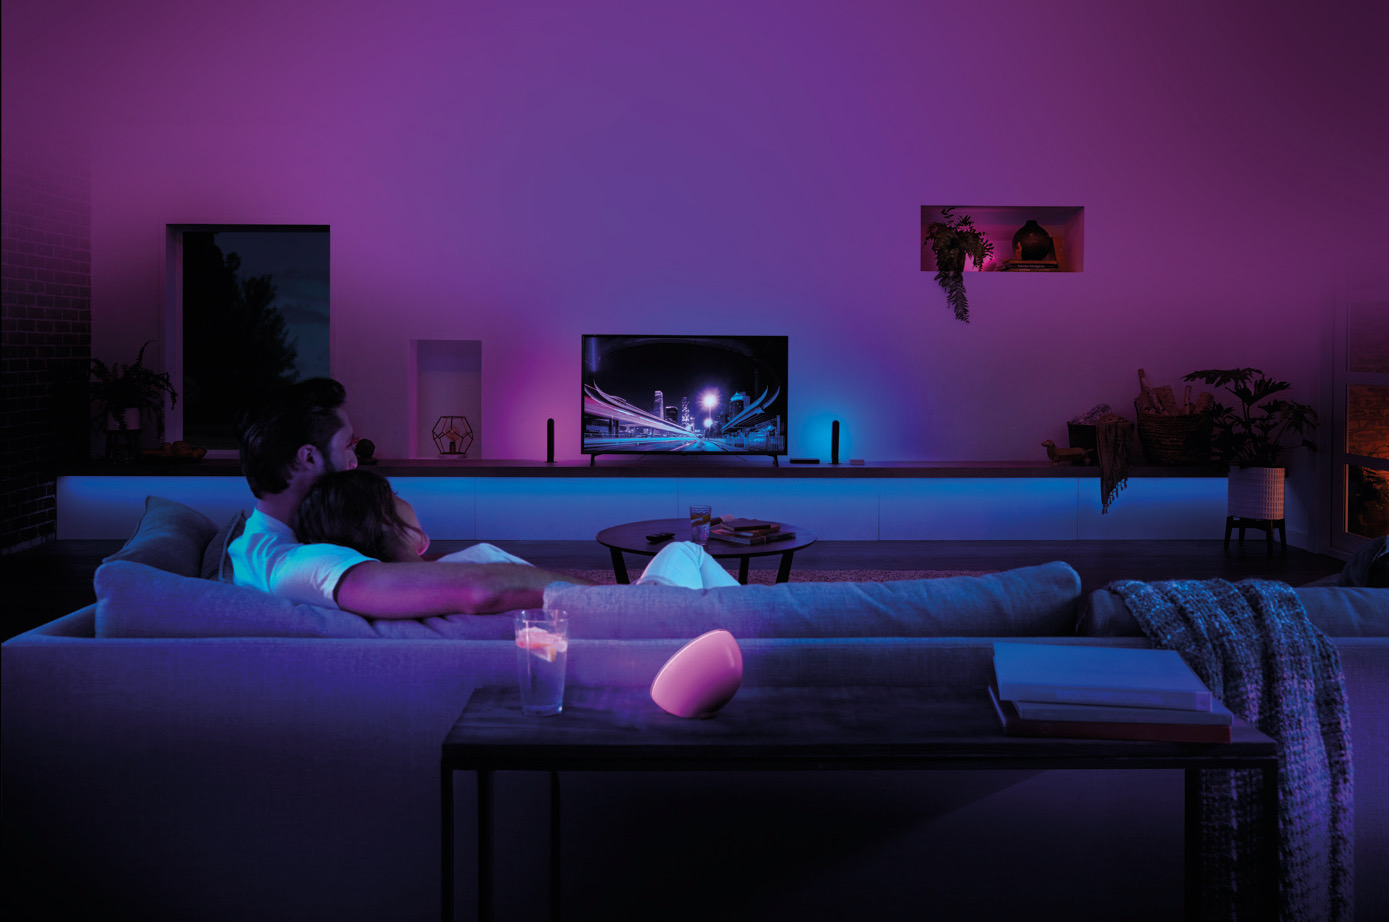 Hueblog: Philips Hue still has something exciting to show